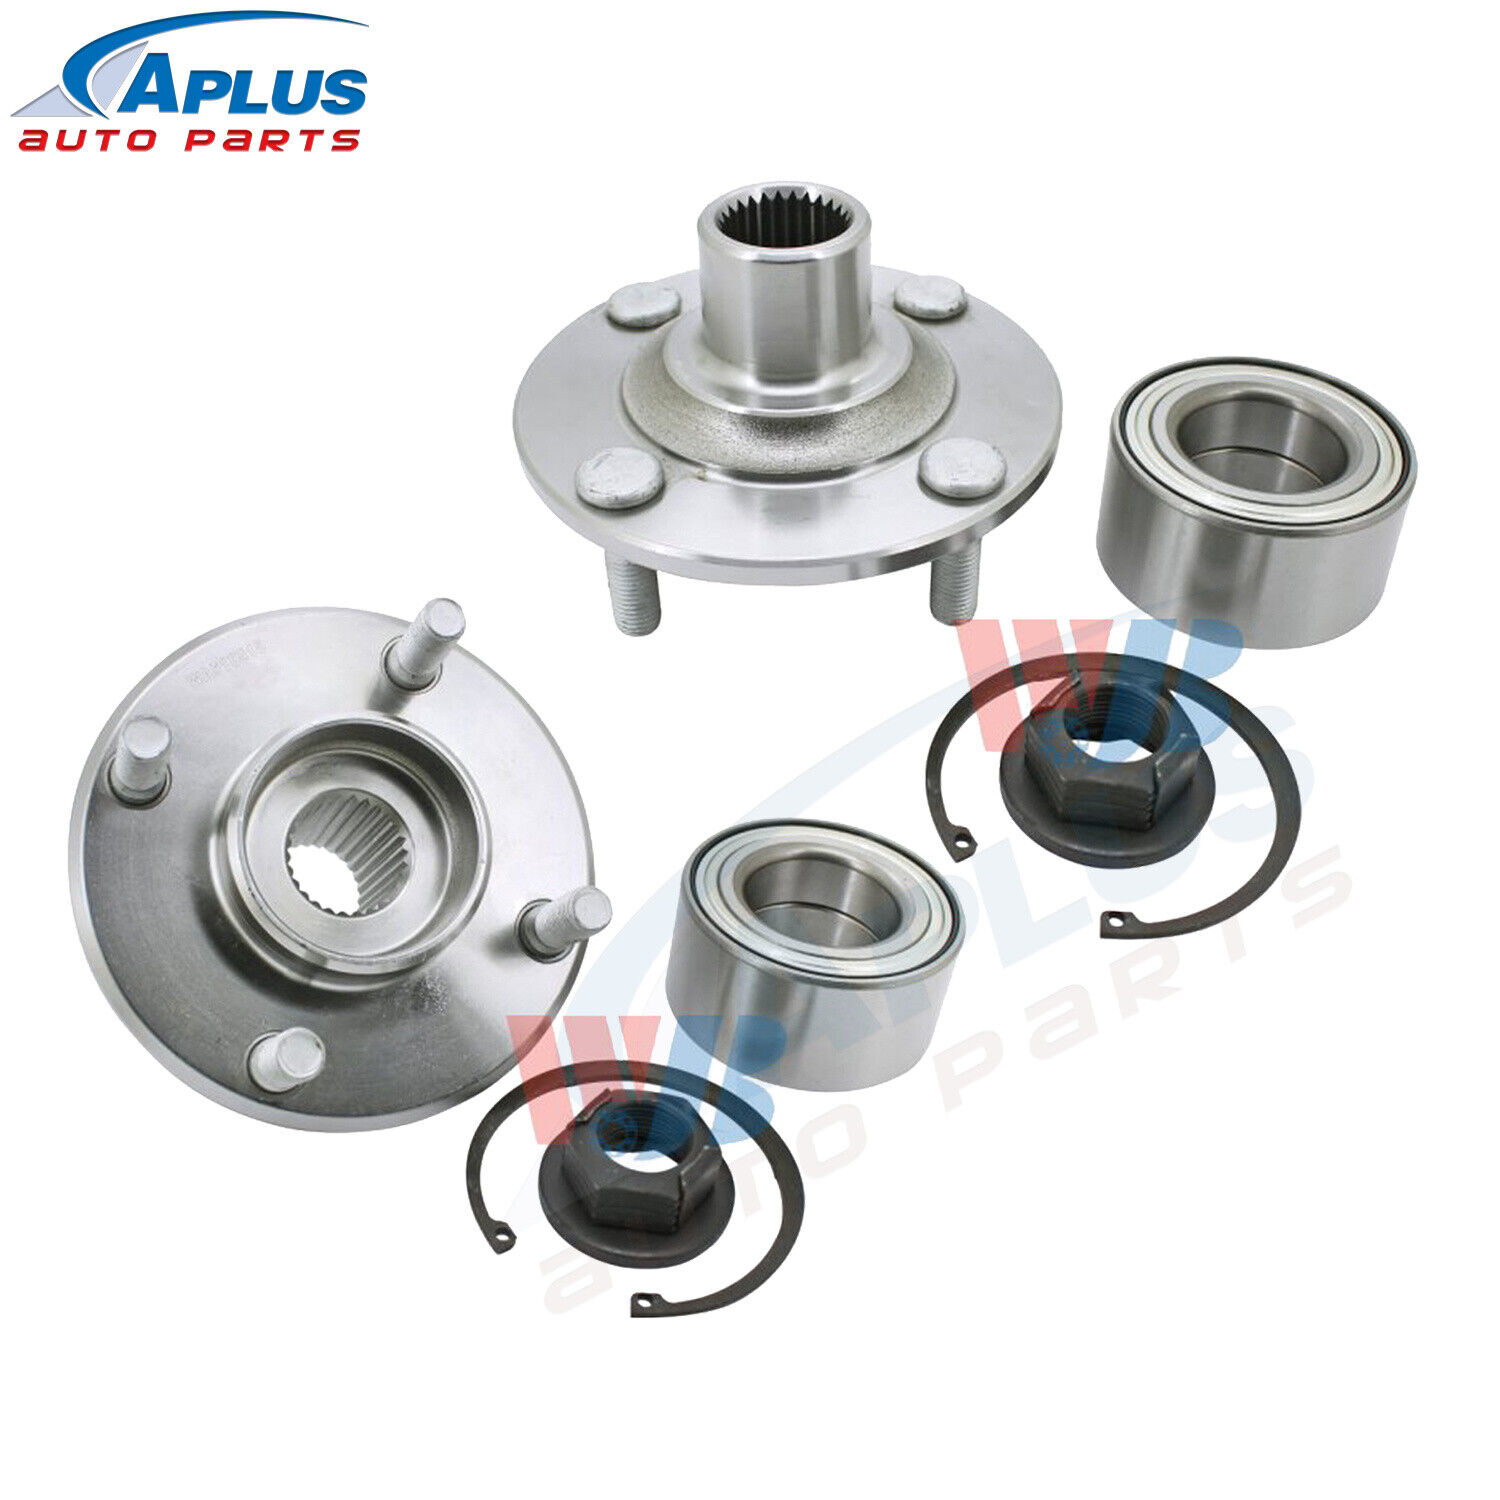 2x Front Wheel Hub Bearing Assembly For 95-00 Ford Contour Mercury Mystique FWD